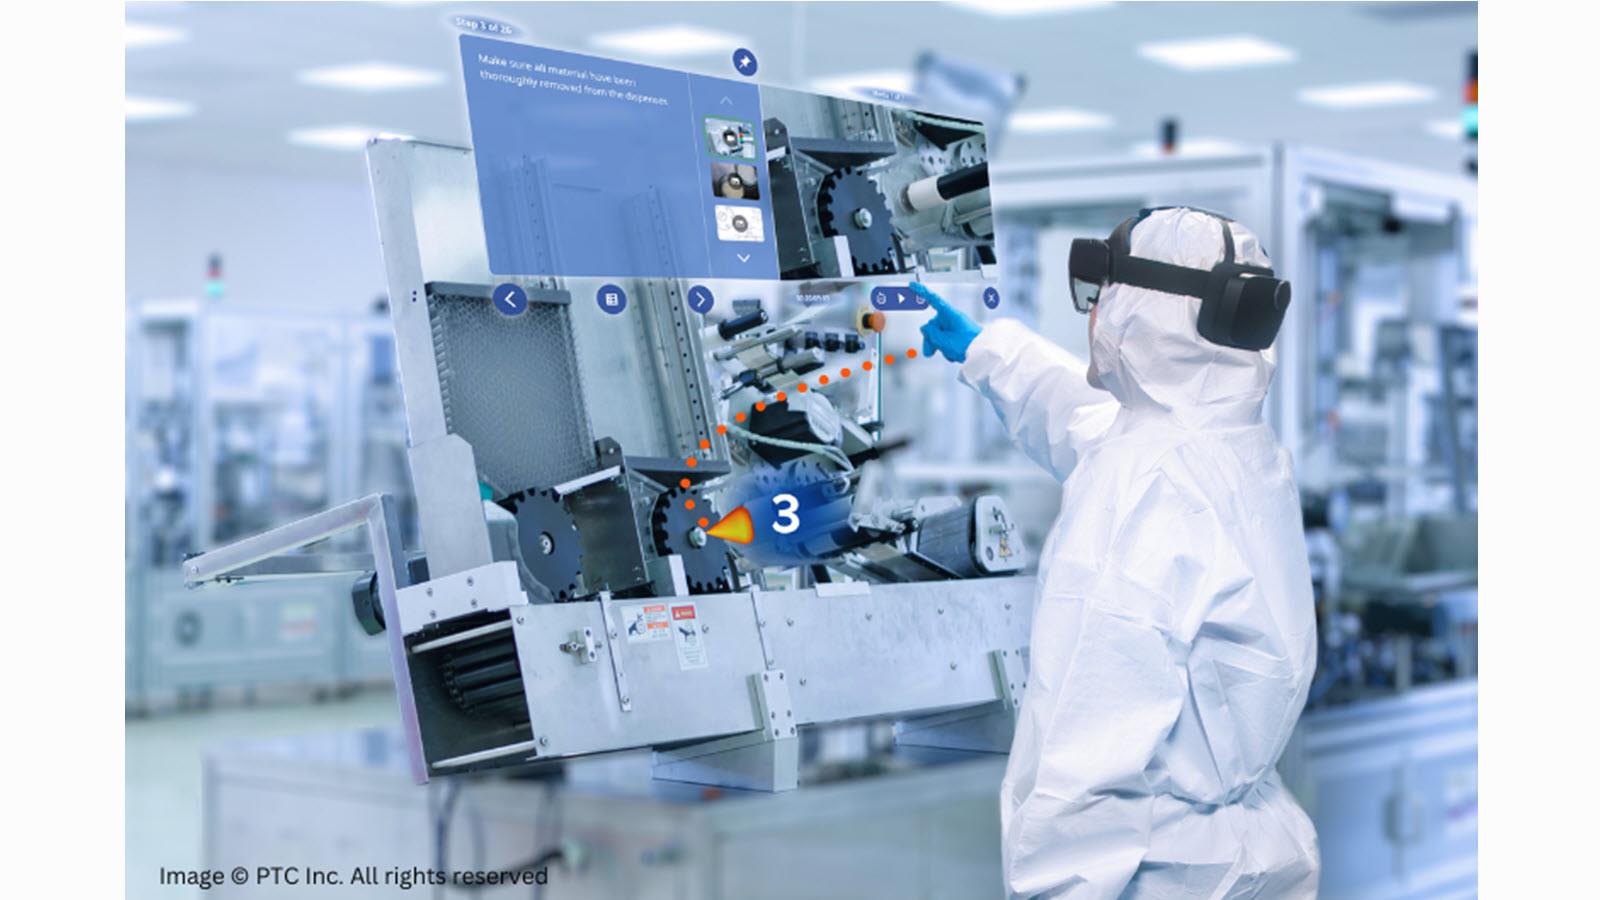 Suited lab worker wears smart glasses in a manufacturing setting